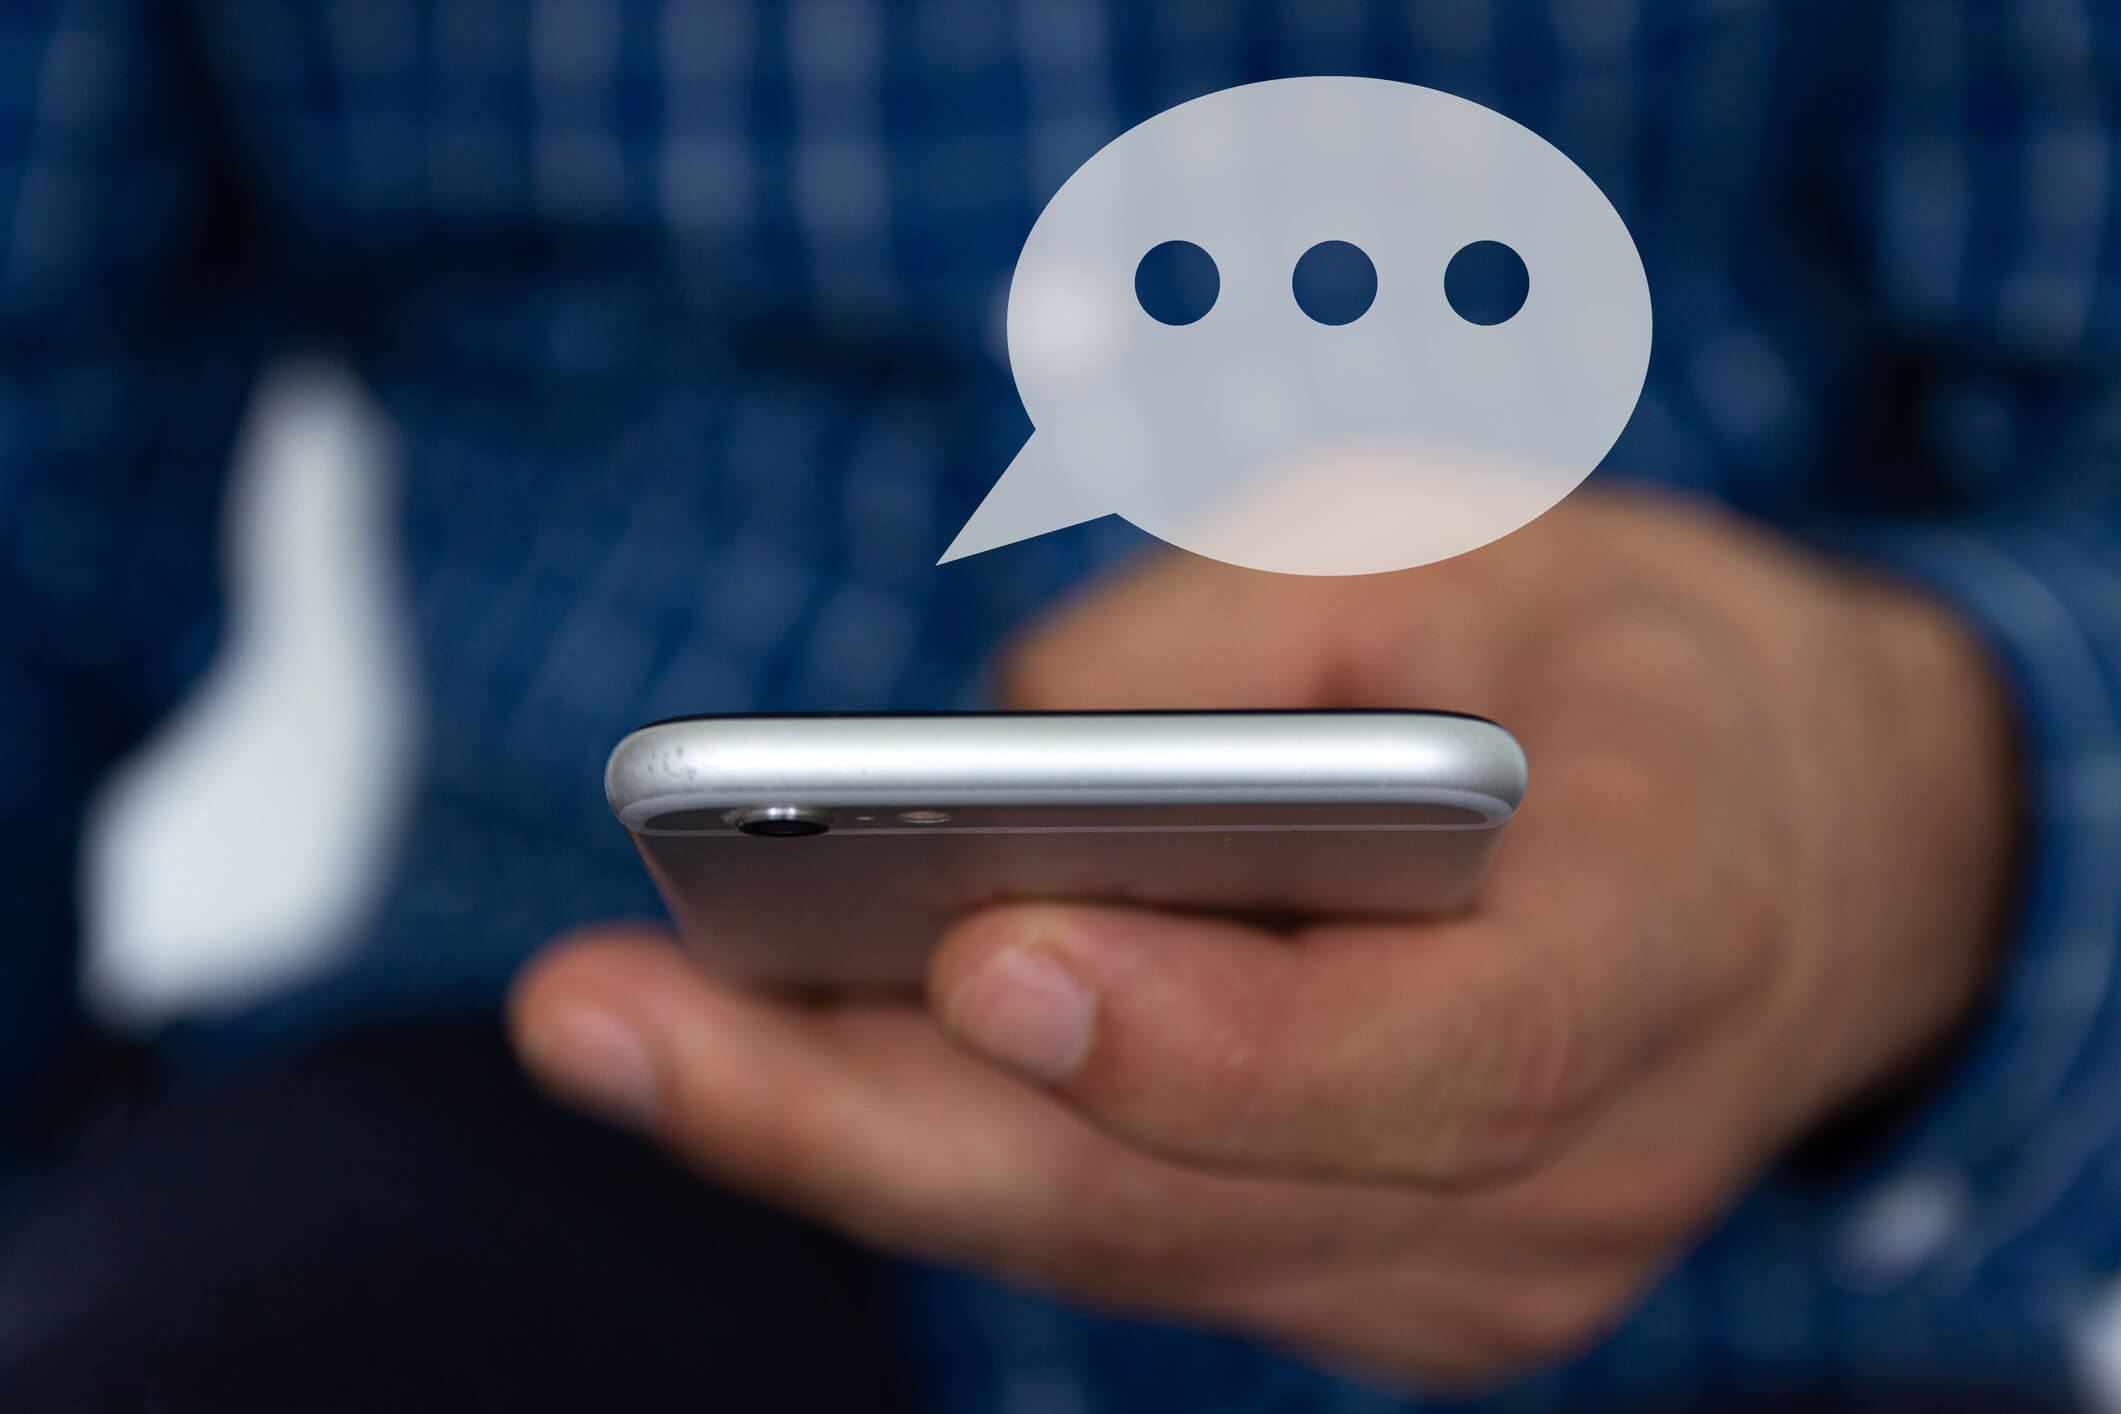 imessages-vs-sms-messages-what-s-the-difference-reviews